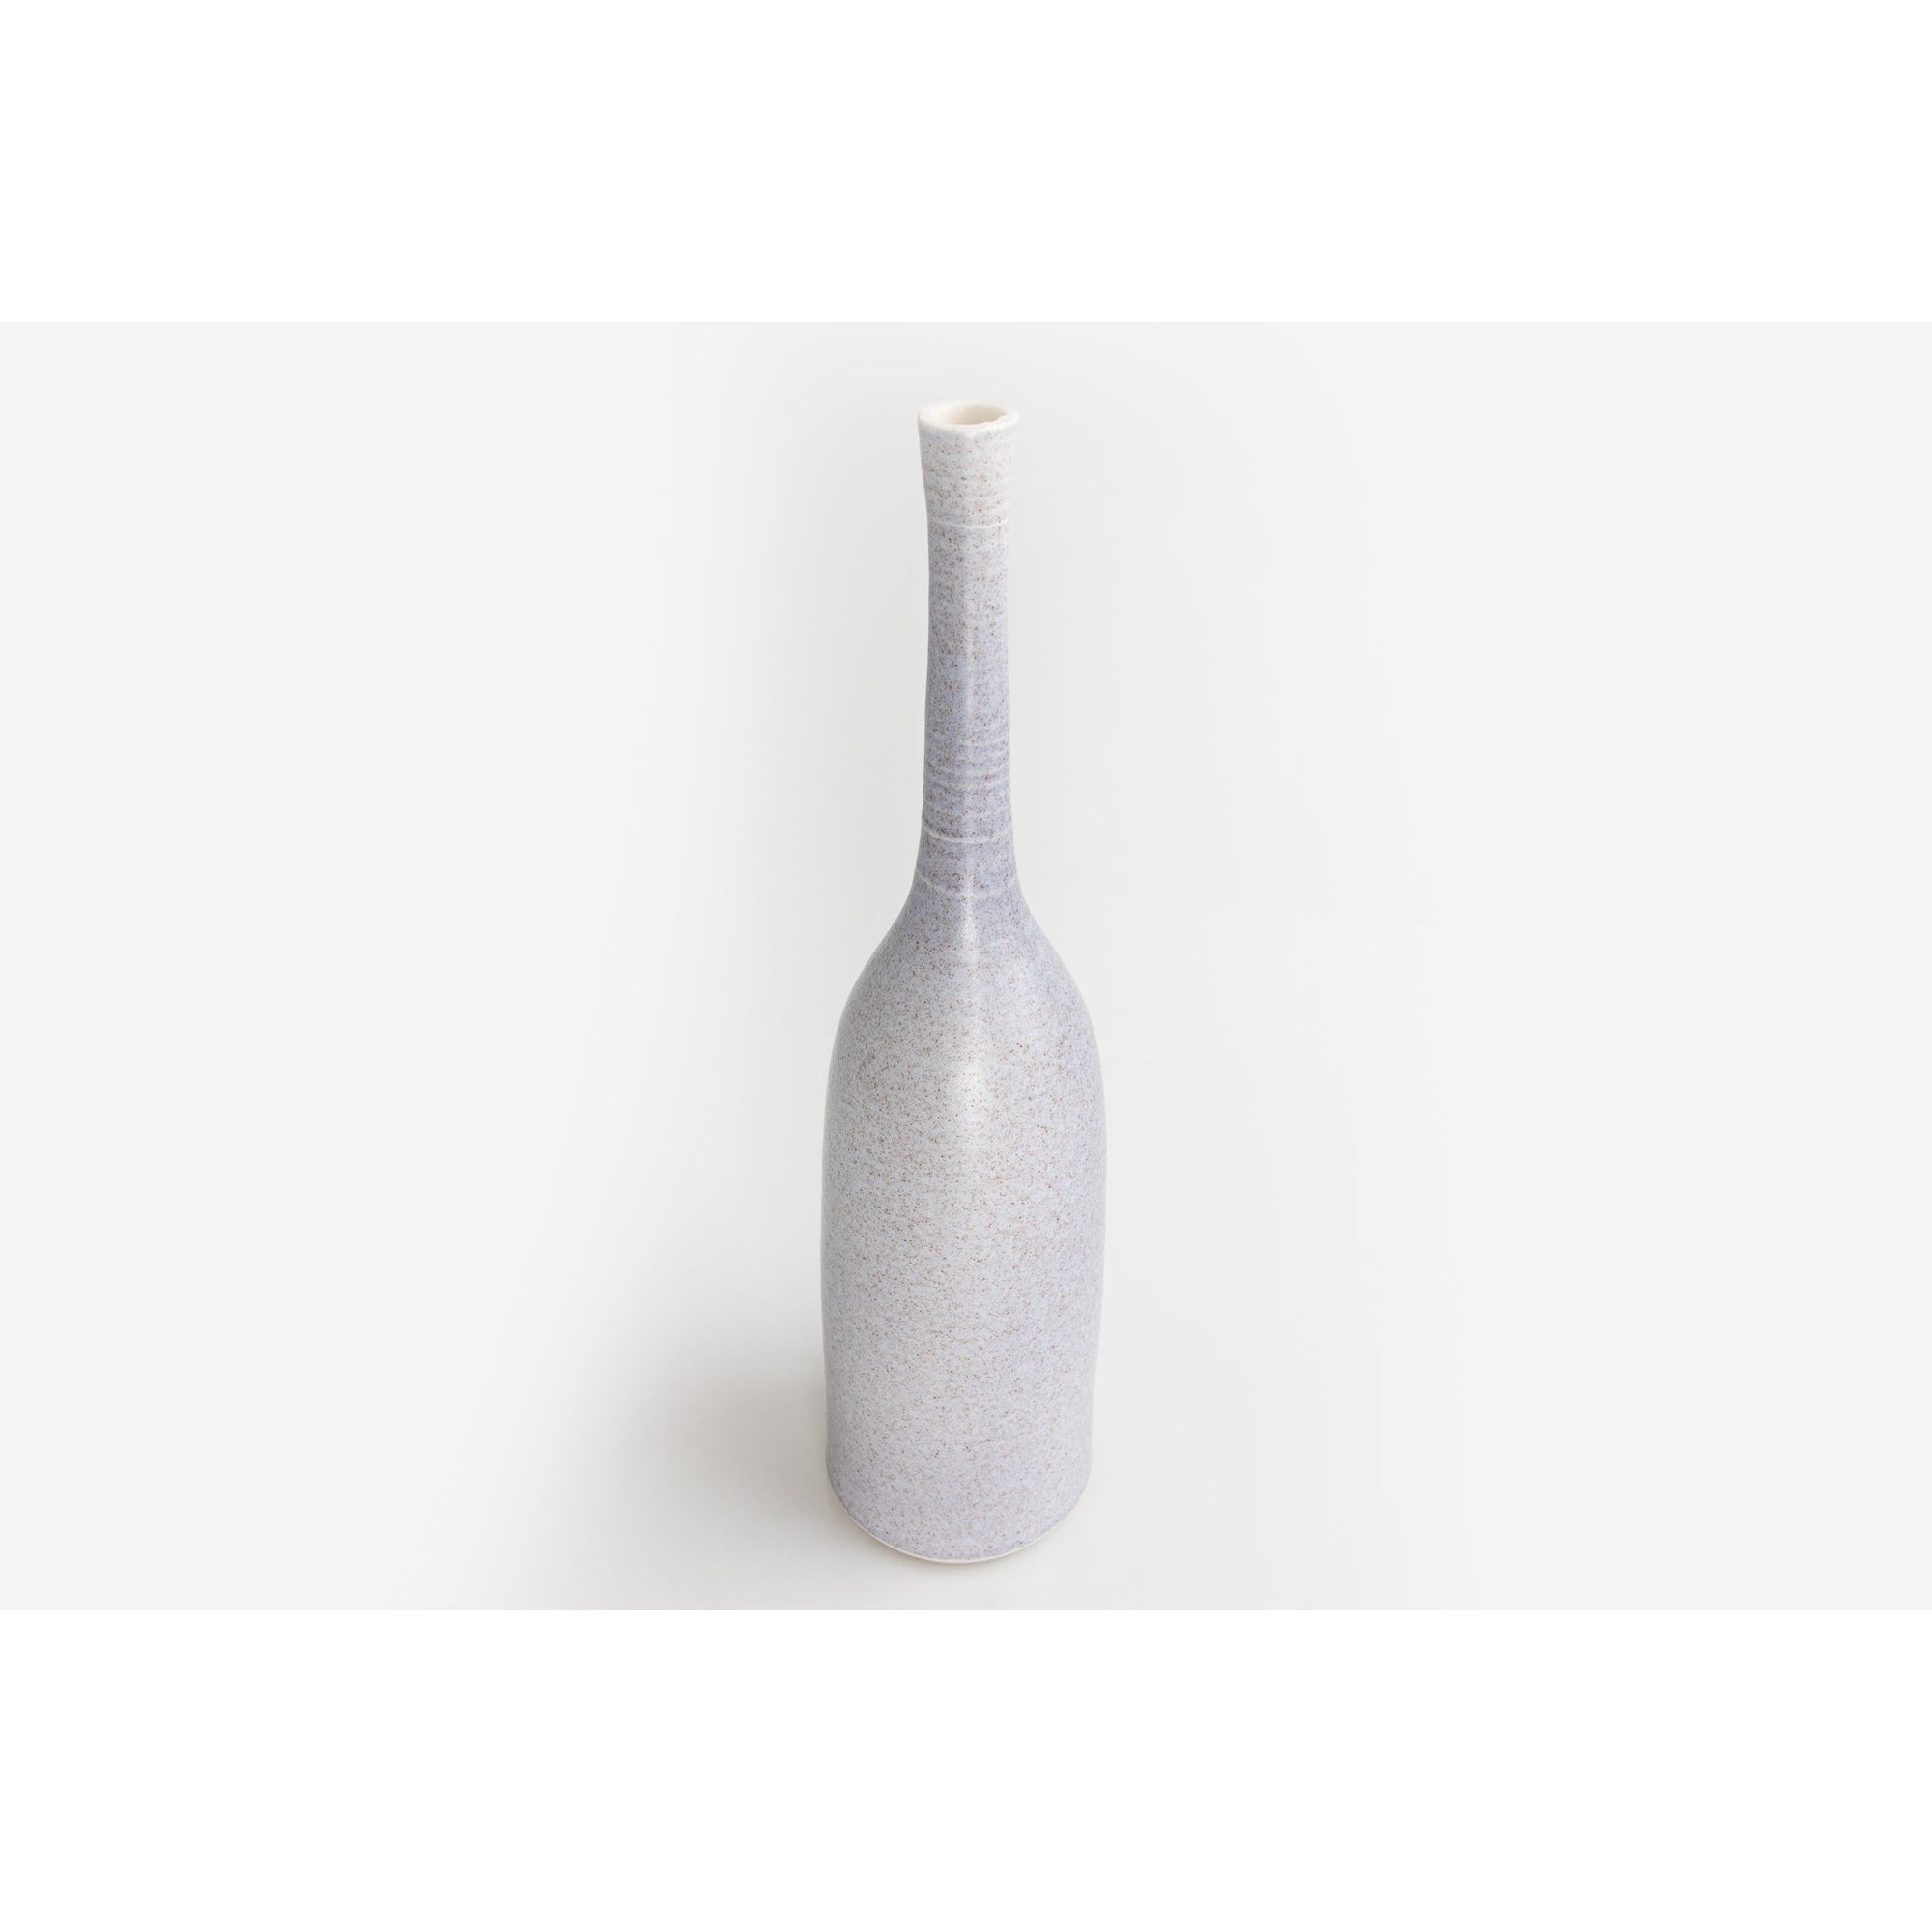 'LB148 French Grey Bottle' by Lucy Burley ceramics, available at Padstow Gallery, Cornwall